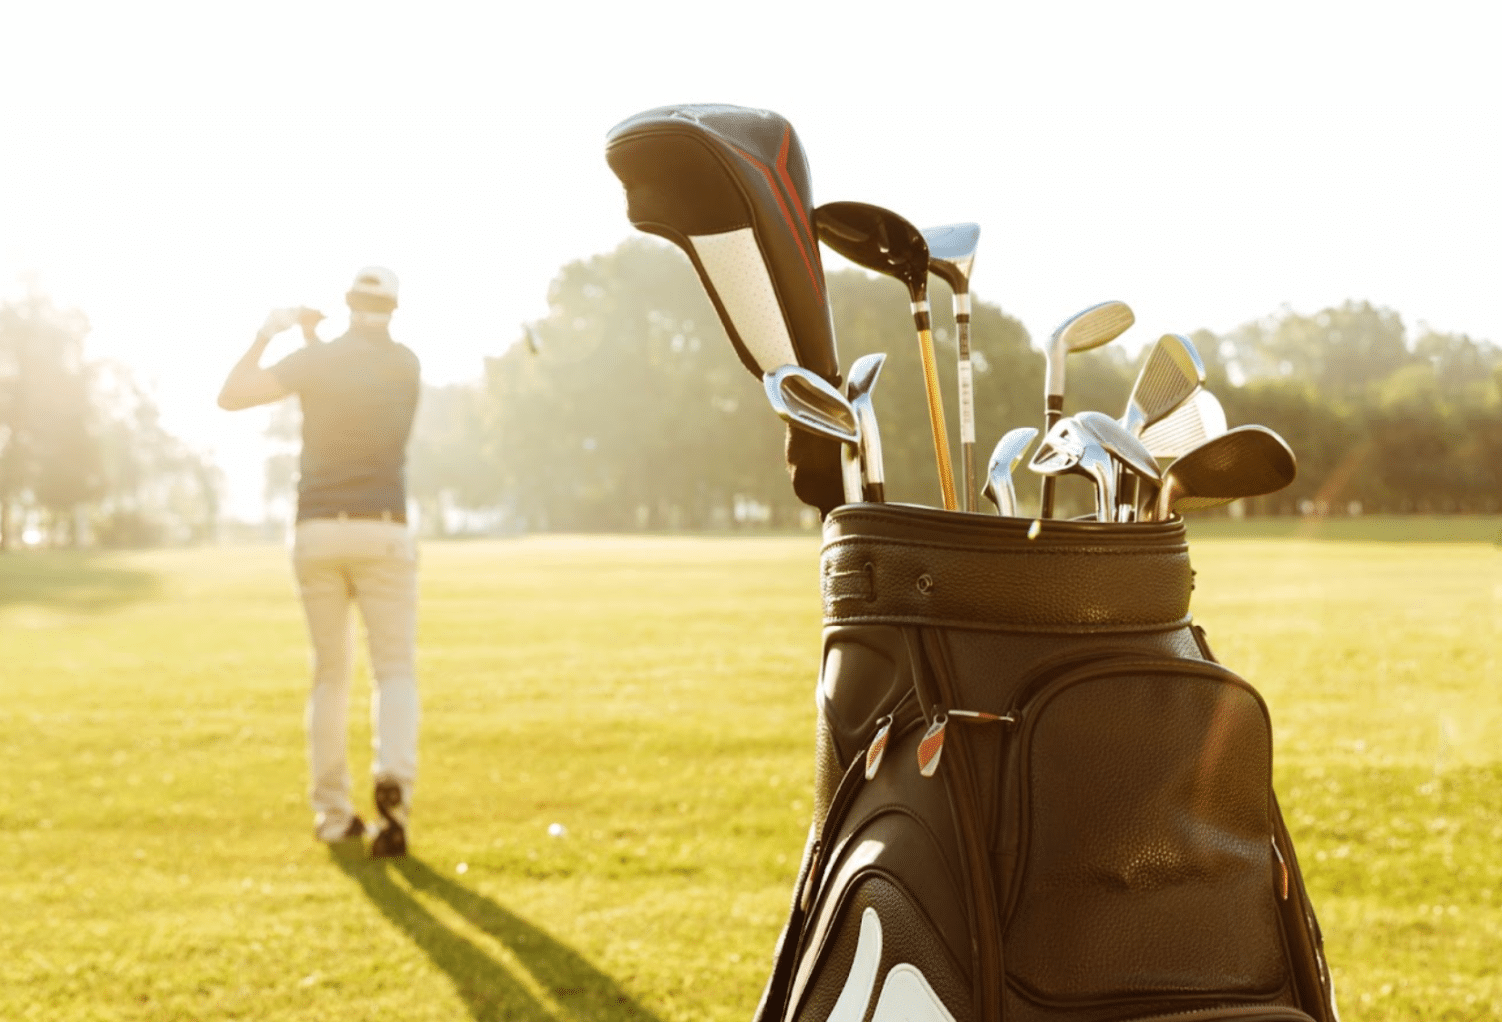 Distance measuring devices for golf